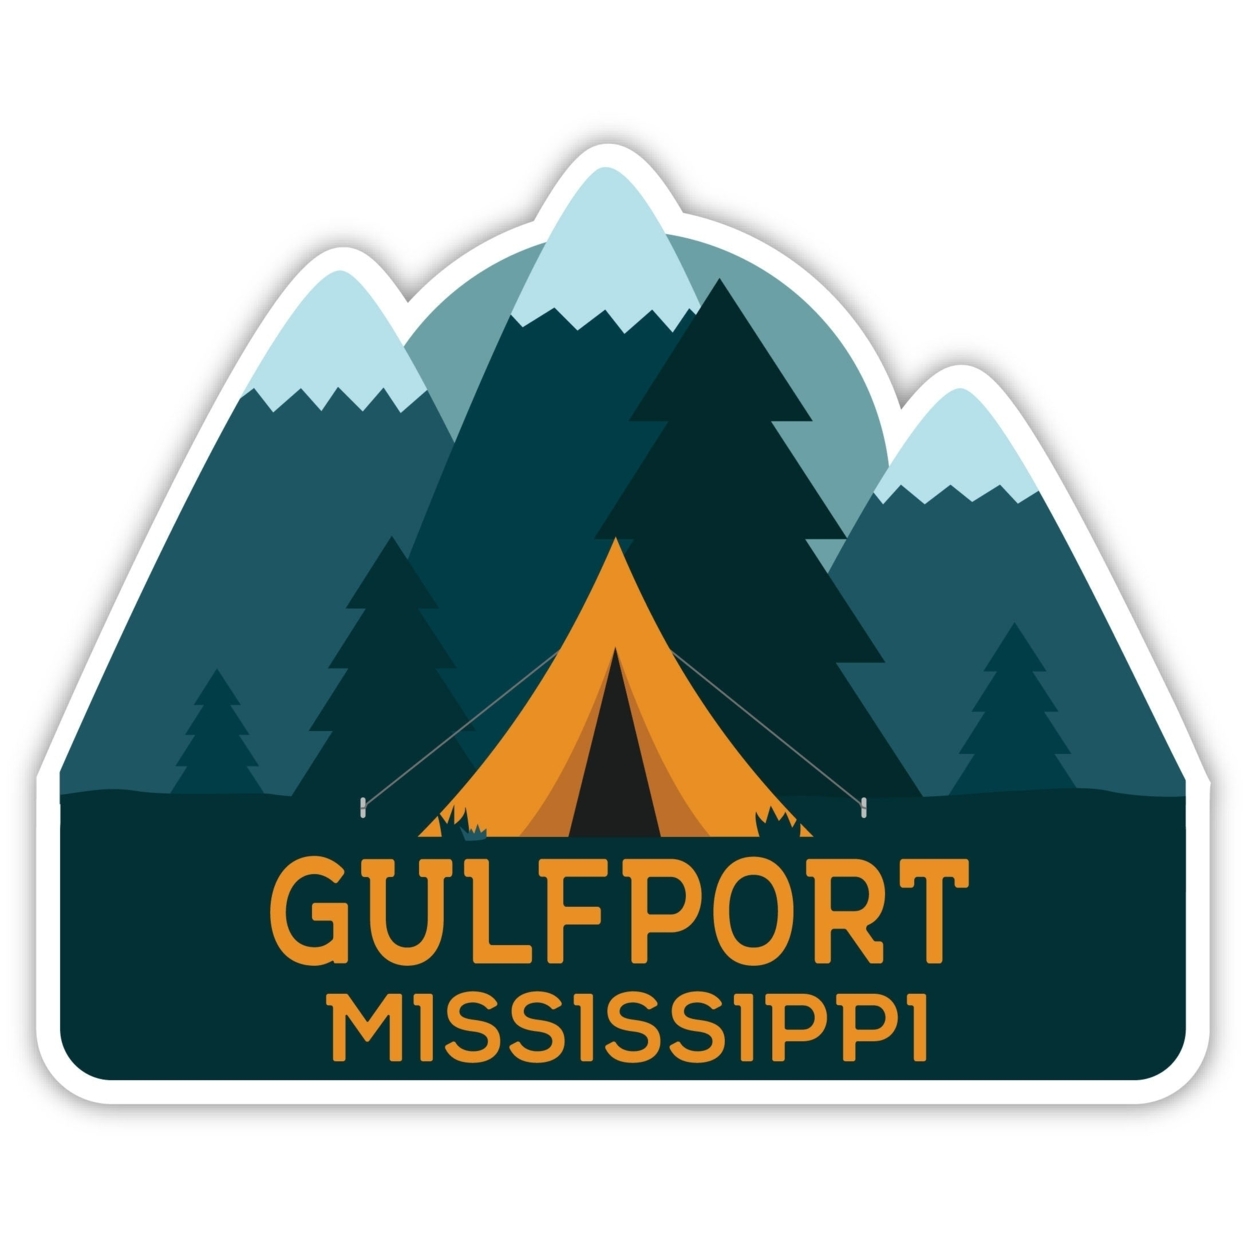 Gulfport Mississippi Souvenir Decorative Stickers (Choose Theme And Size) - 4-Pack, 2-Inch, Camp Life